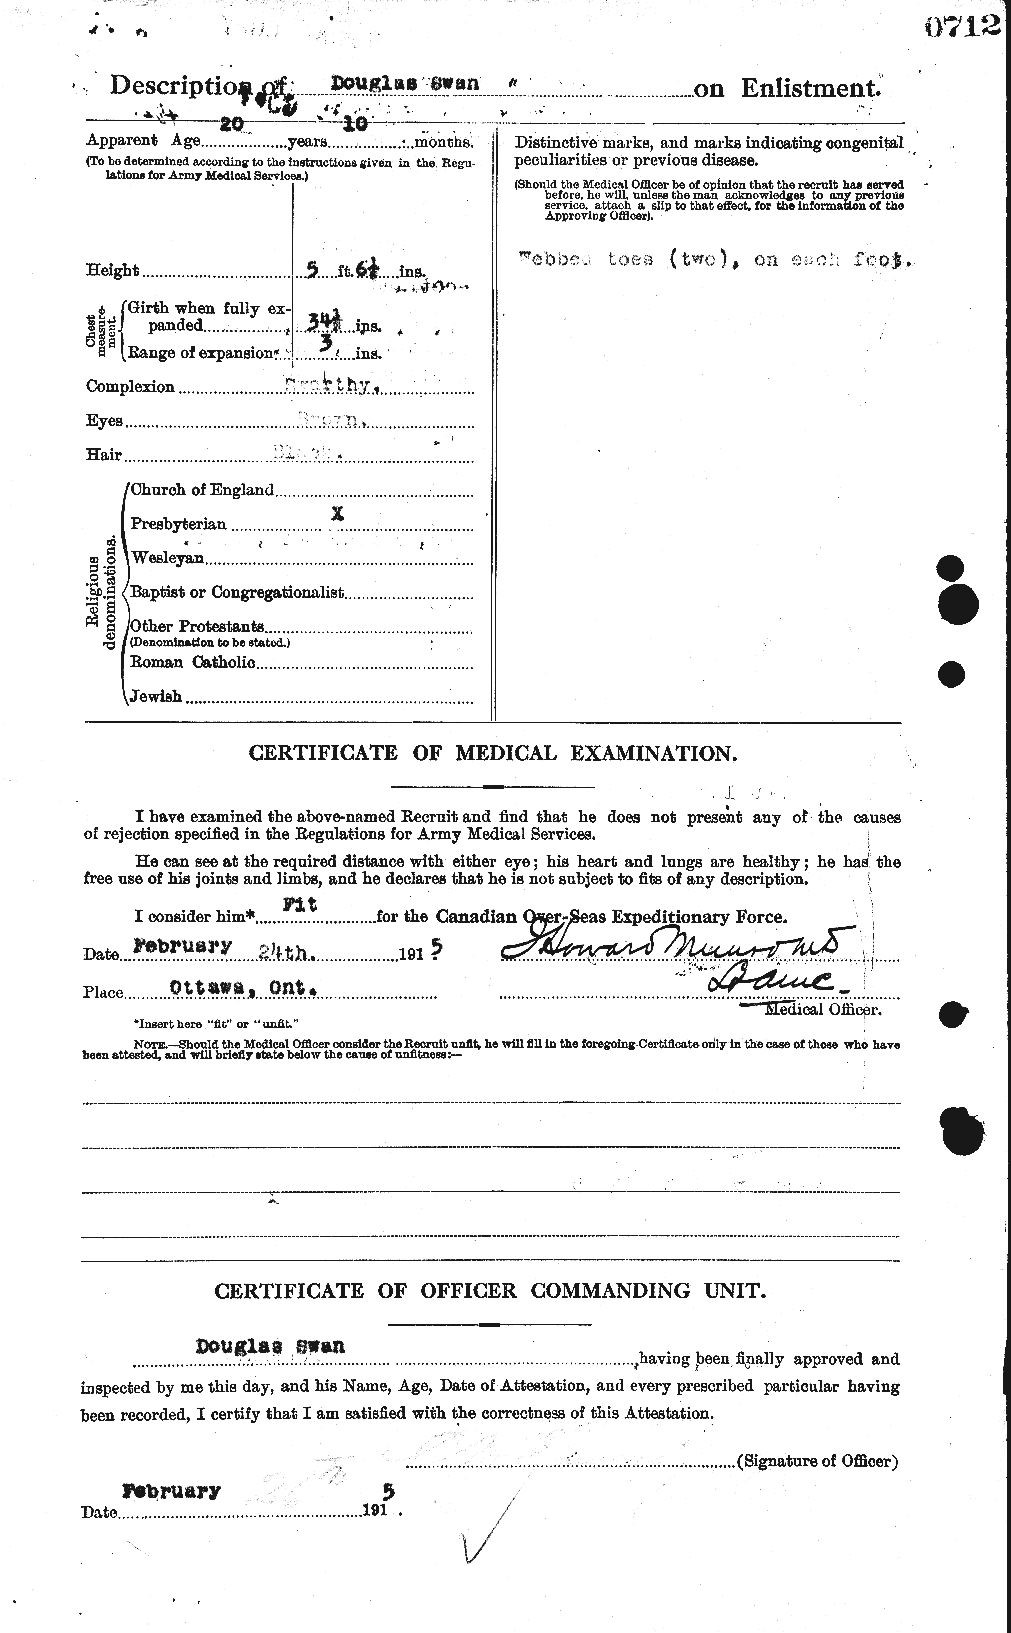 Personnel Records of the First World War - CEF 086118b